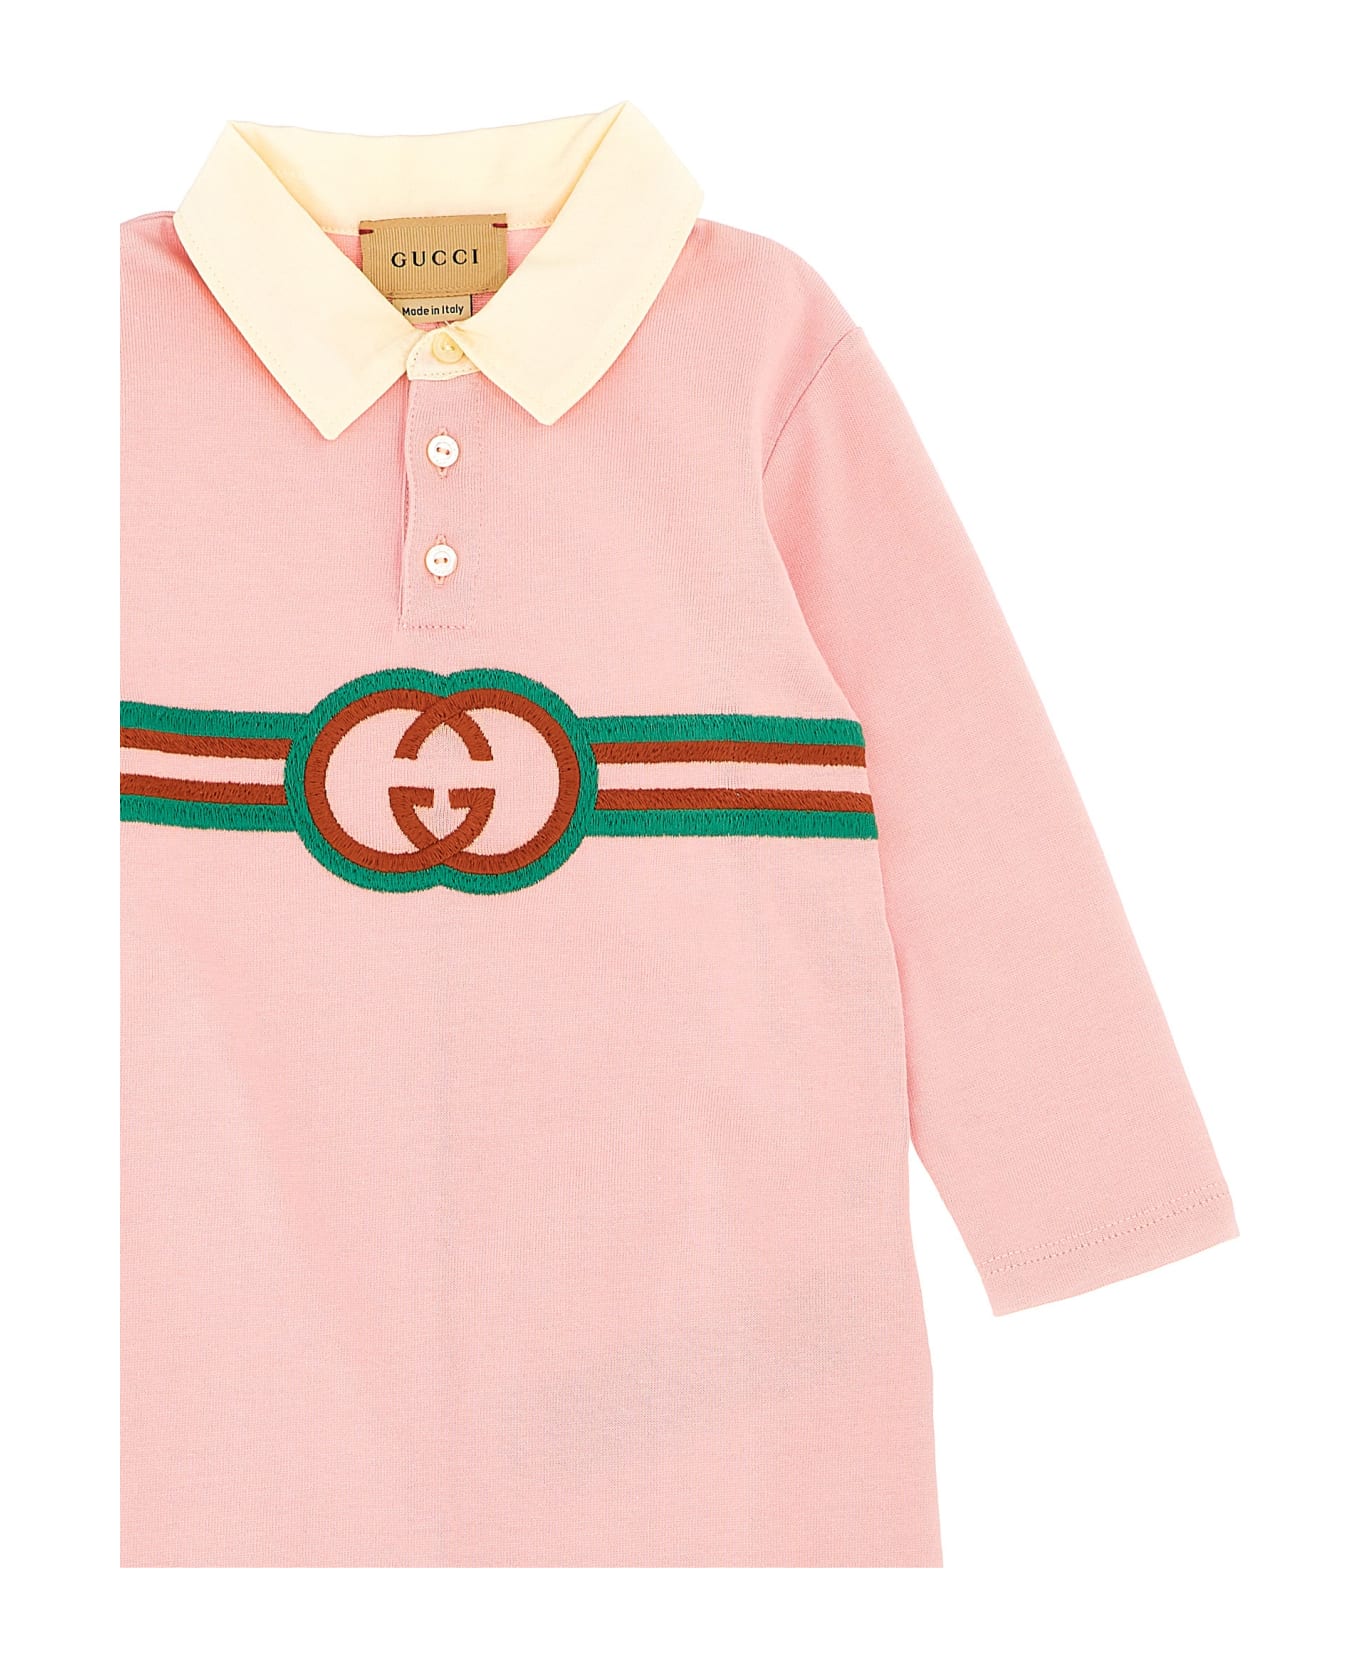 Gucci Logo Embroidery Jumpsuit - Pink